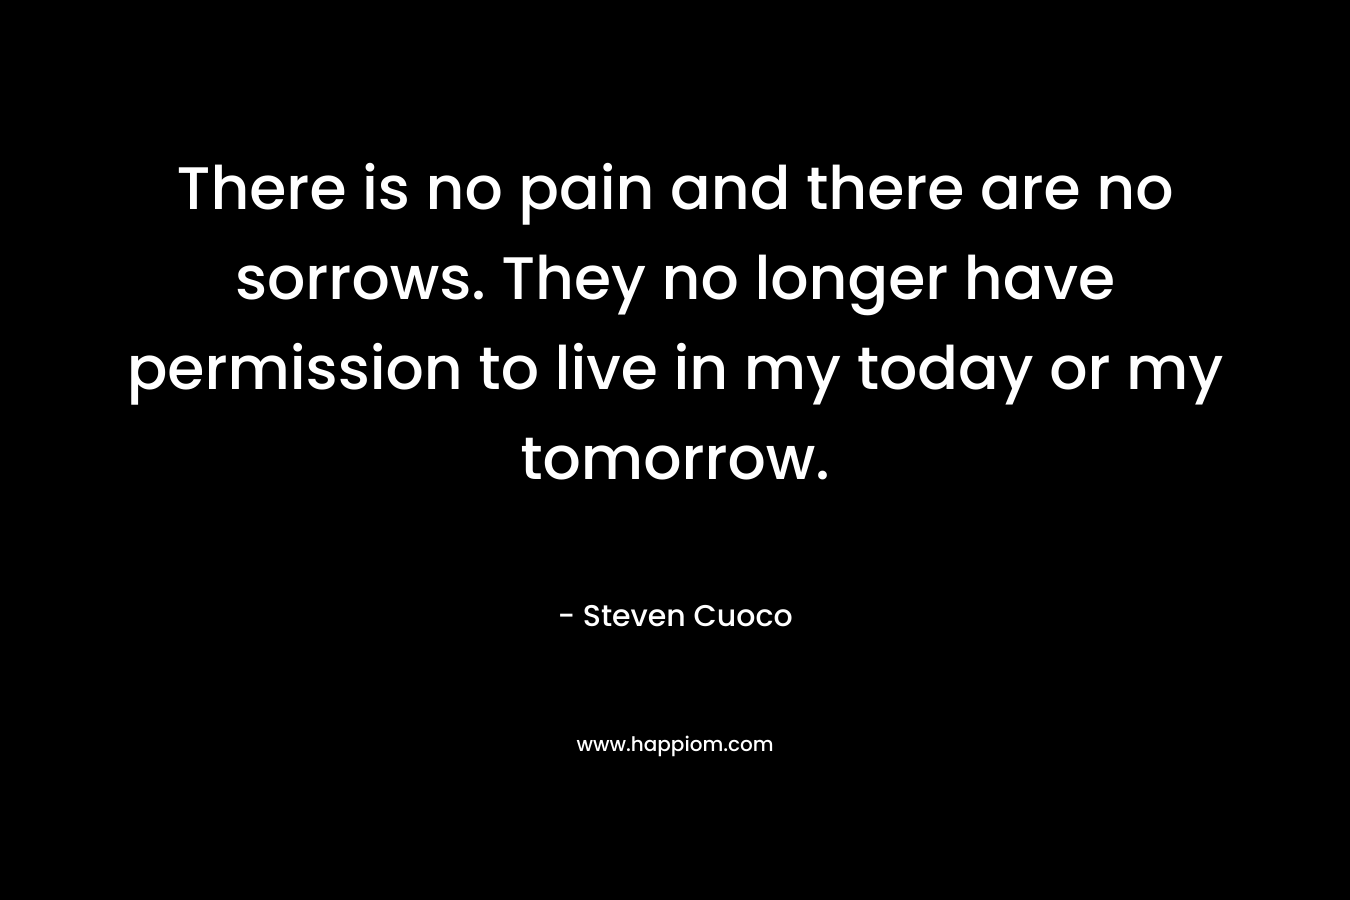 There is no pain and there are no sorrows. They no longer have permission to live in my today or my tomorrow.